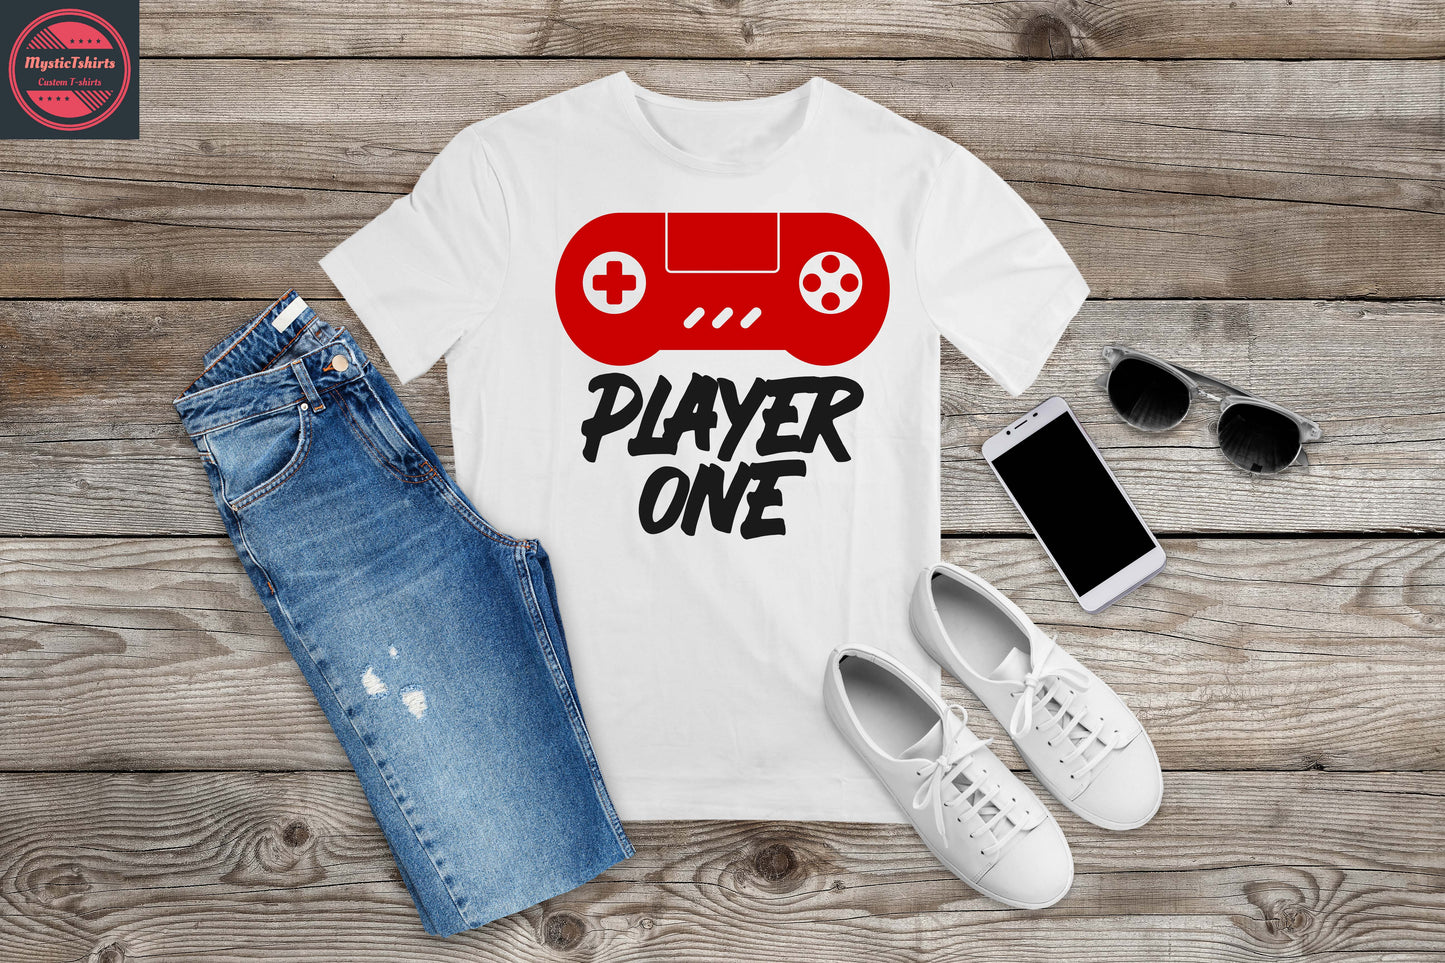 402. PLAYER ONE, Custom Made Shirt, Personalized T-Shirt, Custom Text, Make Your Own Shirt, Custom Tee